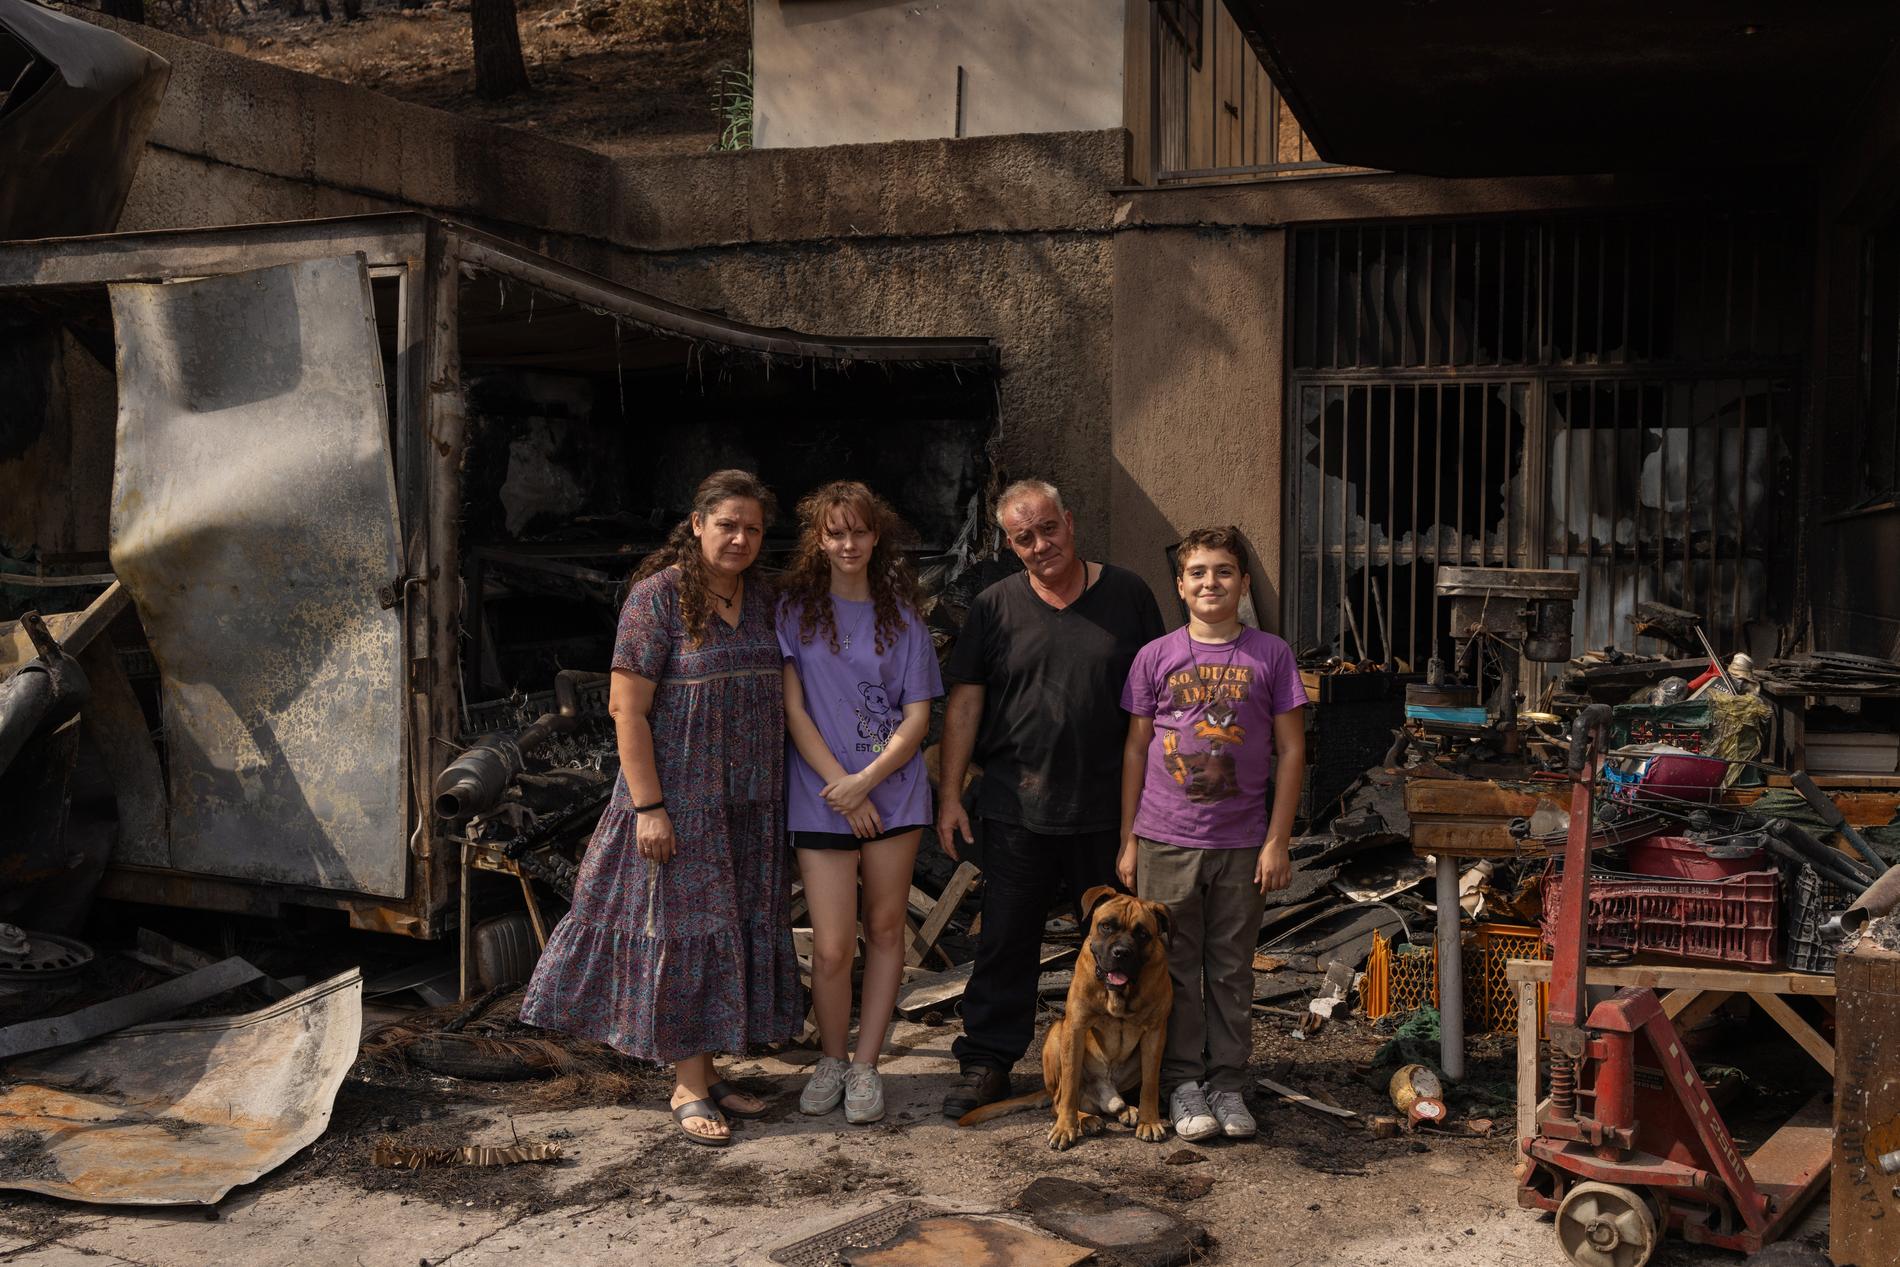 Forest fires continue in Greece.  This is the story of a family who had to flee